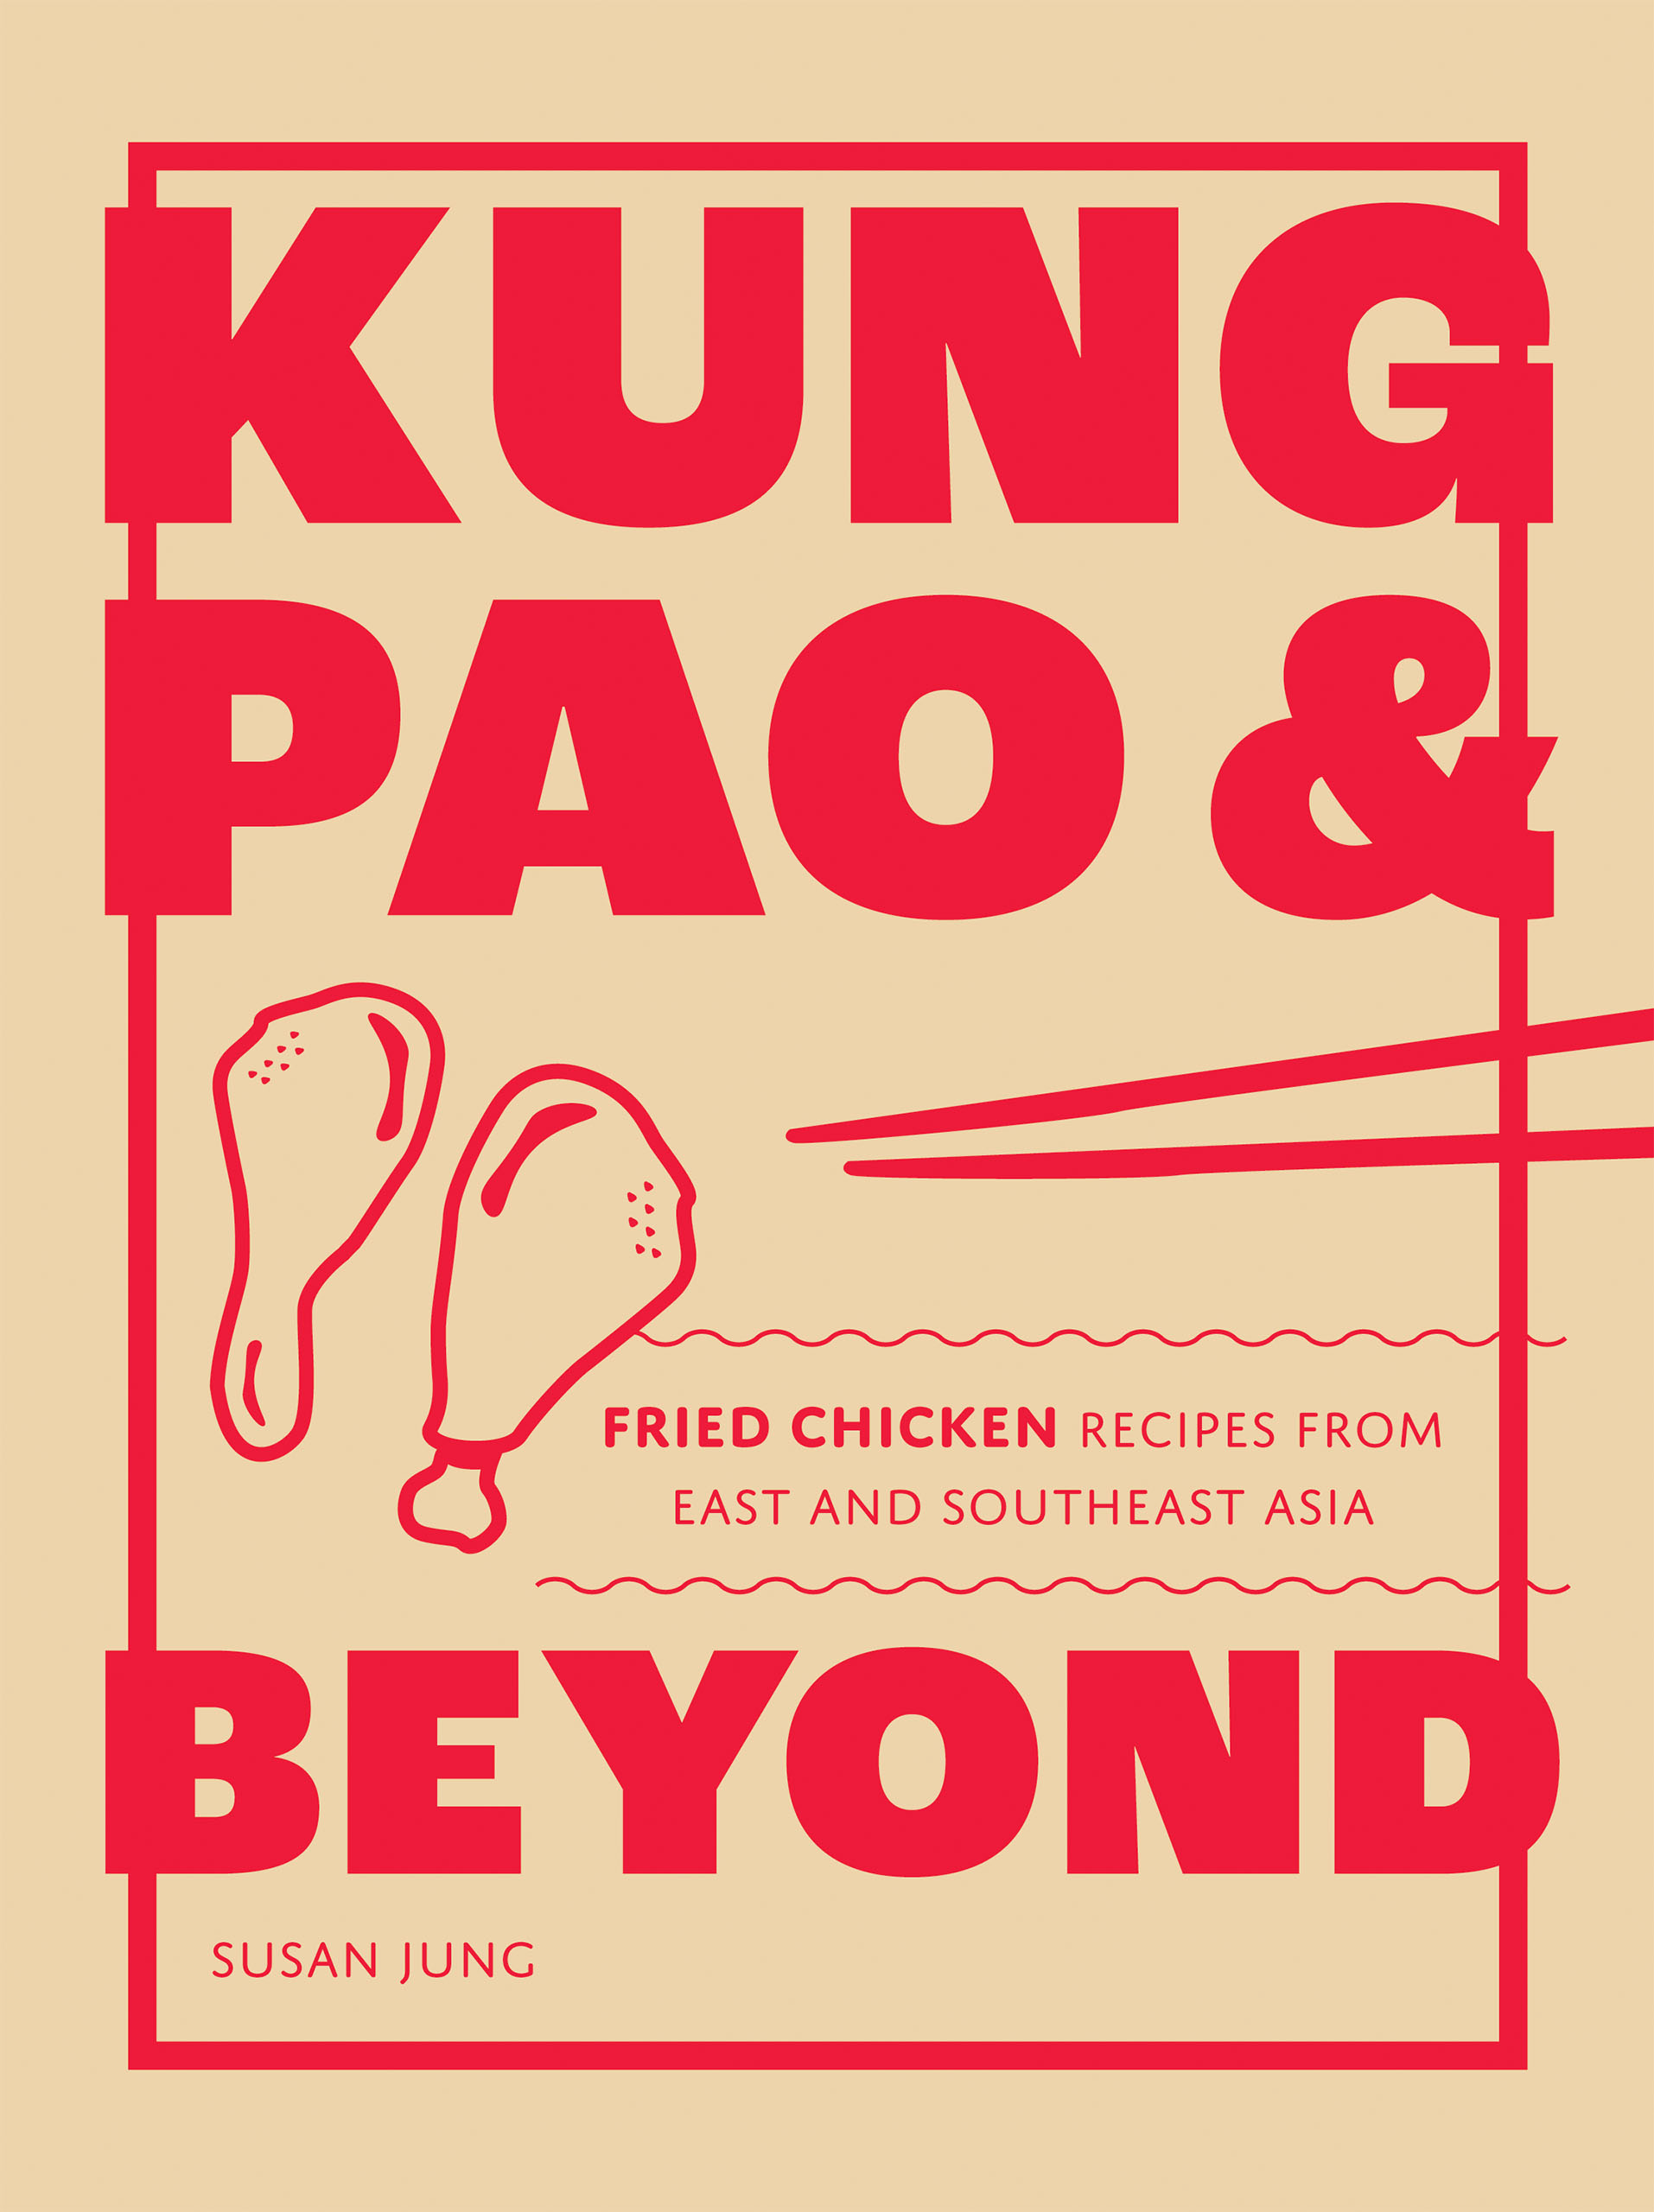 kung pao and beyond cookbook cover by susan jung